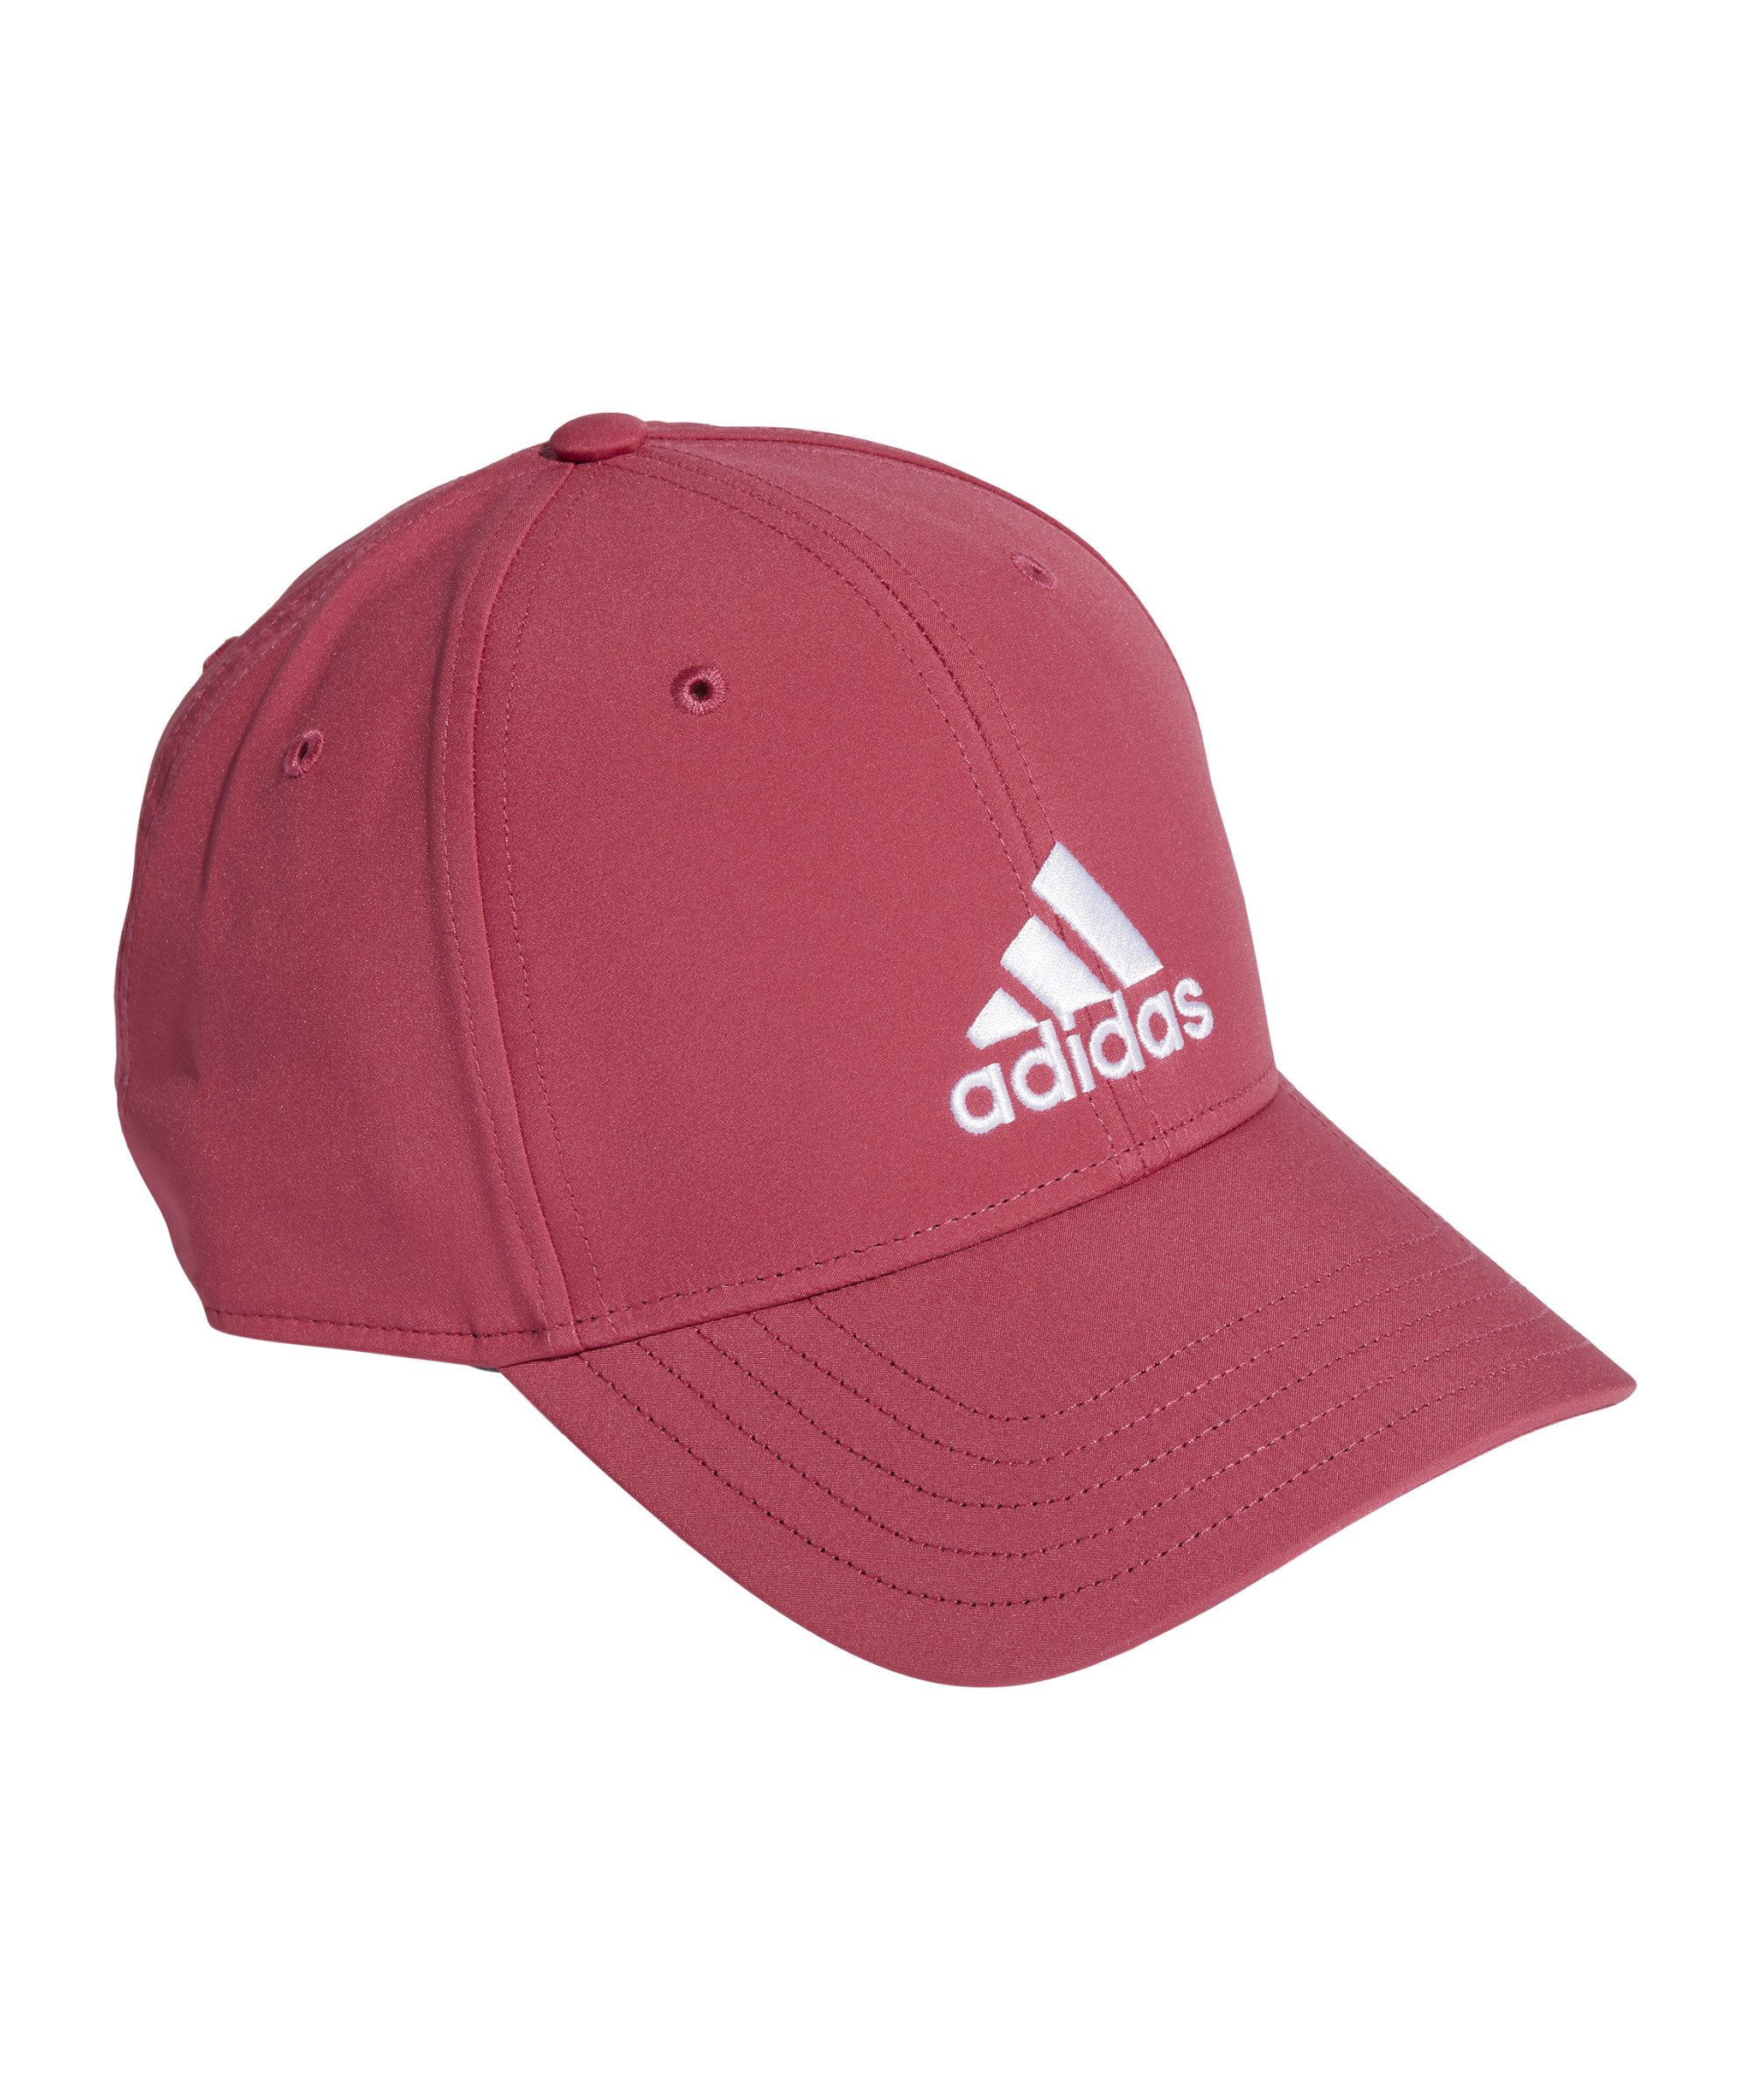 adidas Performance Beanie Embroidered Cap